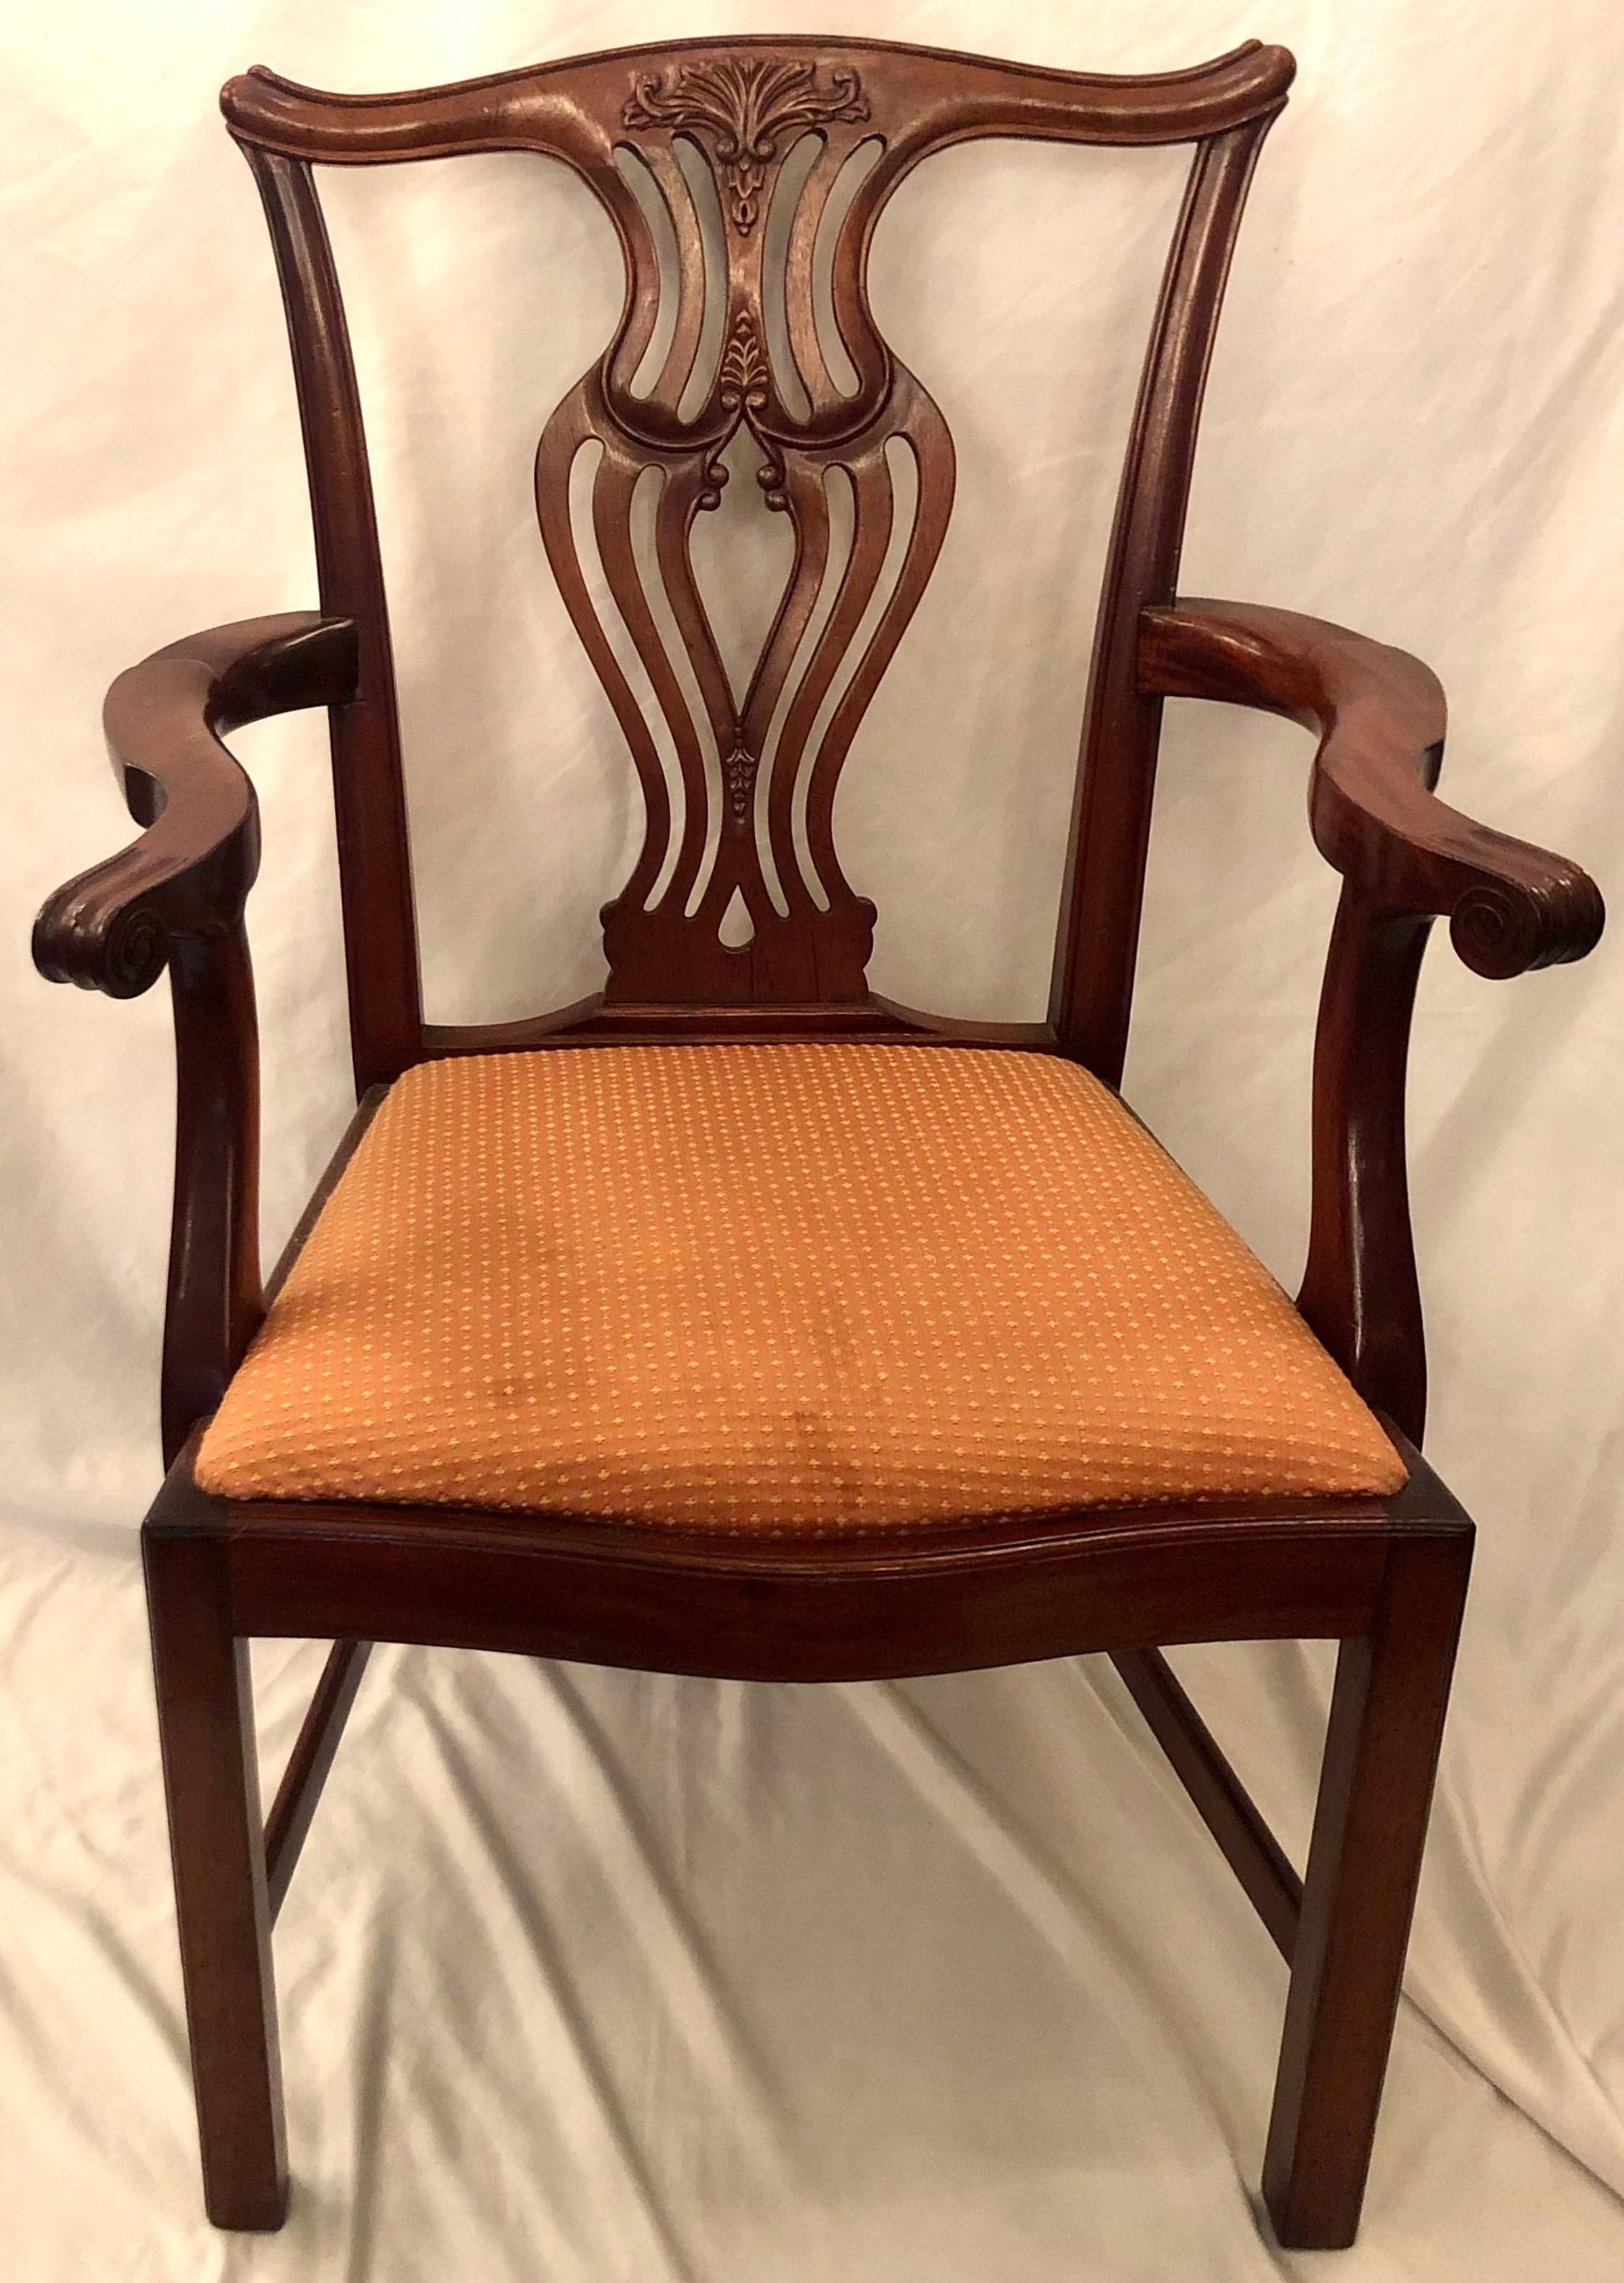 Set of 8 antique English mahogany dining chairs, circa 1910-1920.
2 arm chairs: Height - 38 1/2 inches, width - 26 inches, depth - 21 1/2 inches.
6 side chairs: Height - 38 1/2 inches, width - 21 inches, depth - 21 inches.